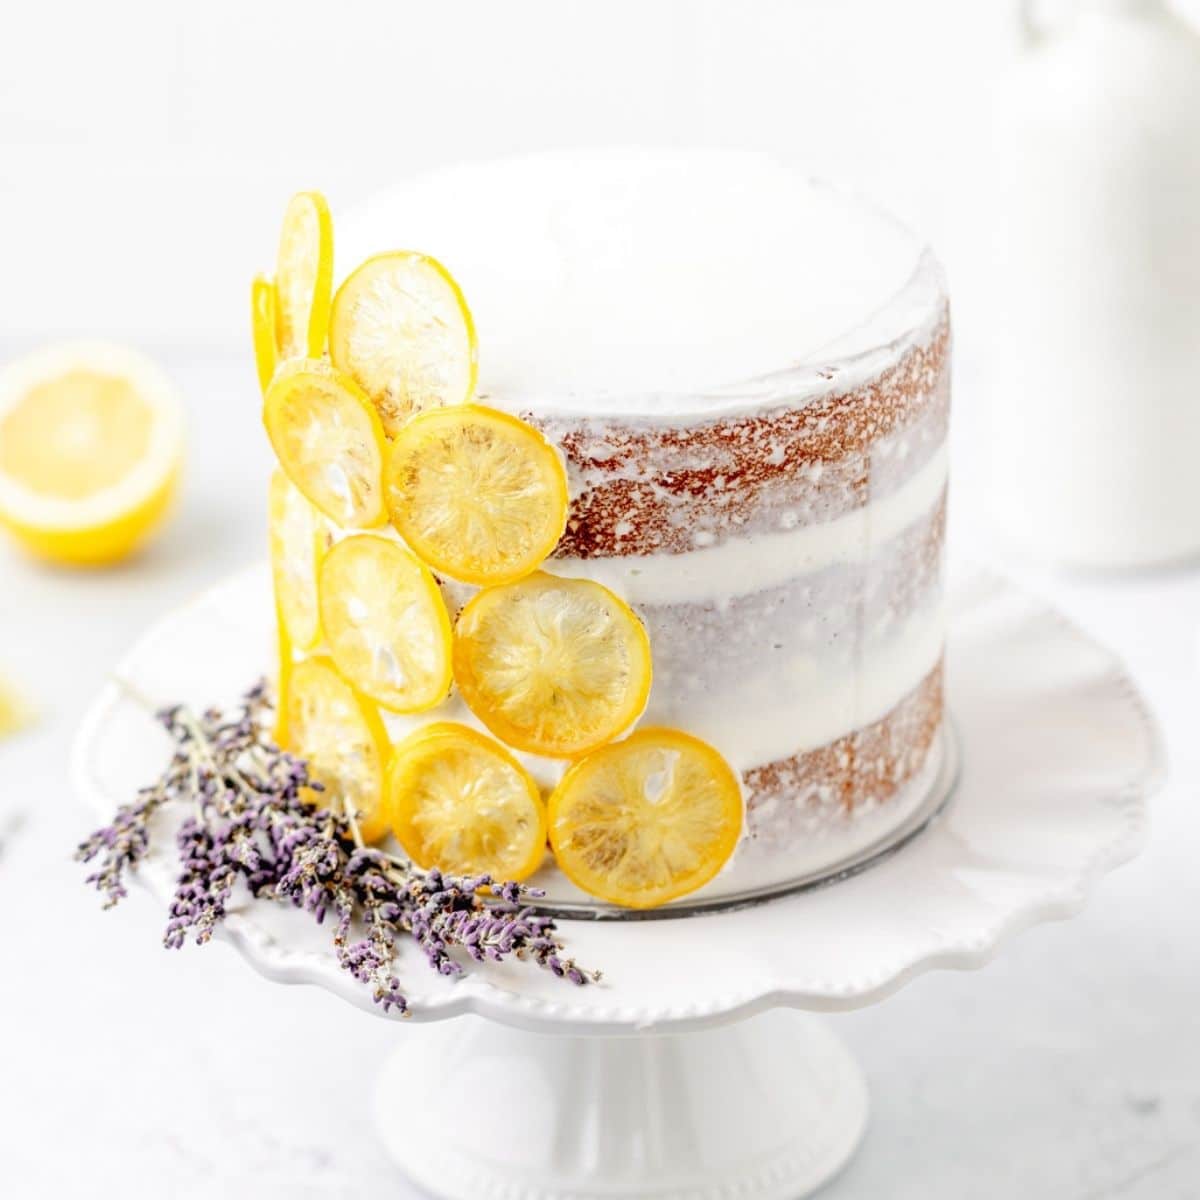 A straight view of a lemon lavender cake with lavender and lemon on the side.